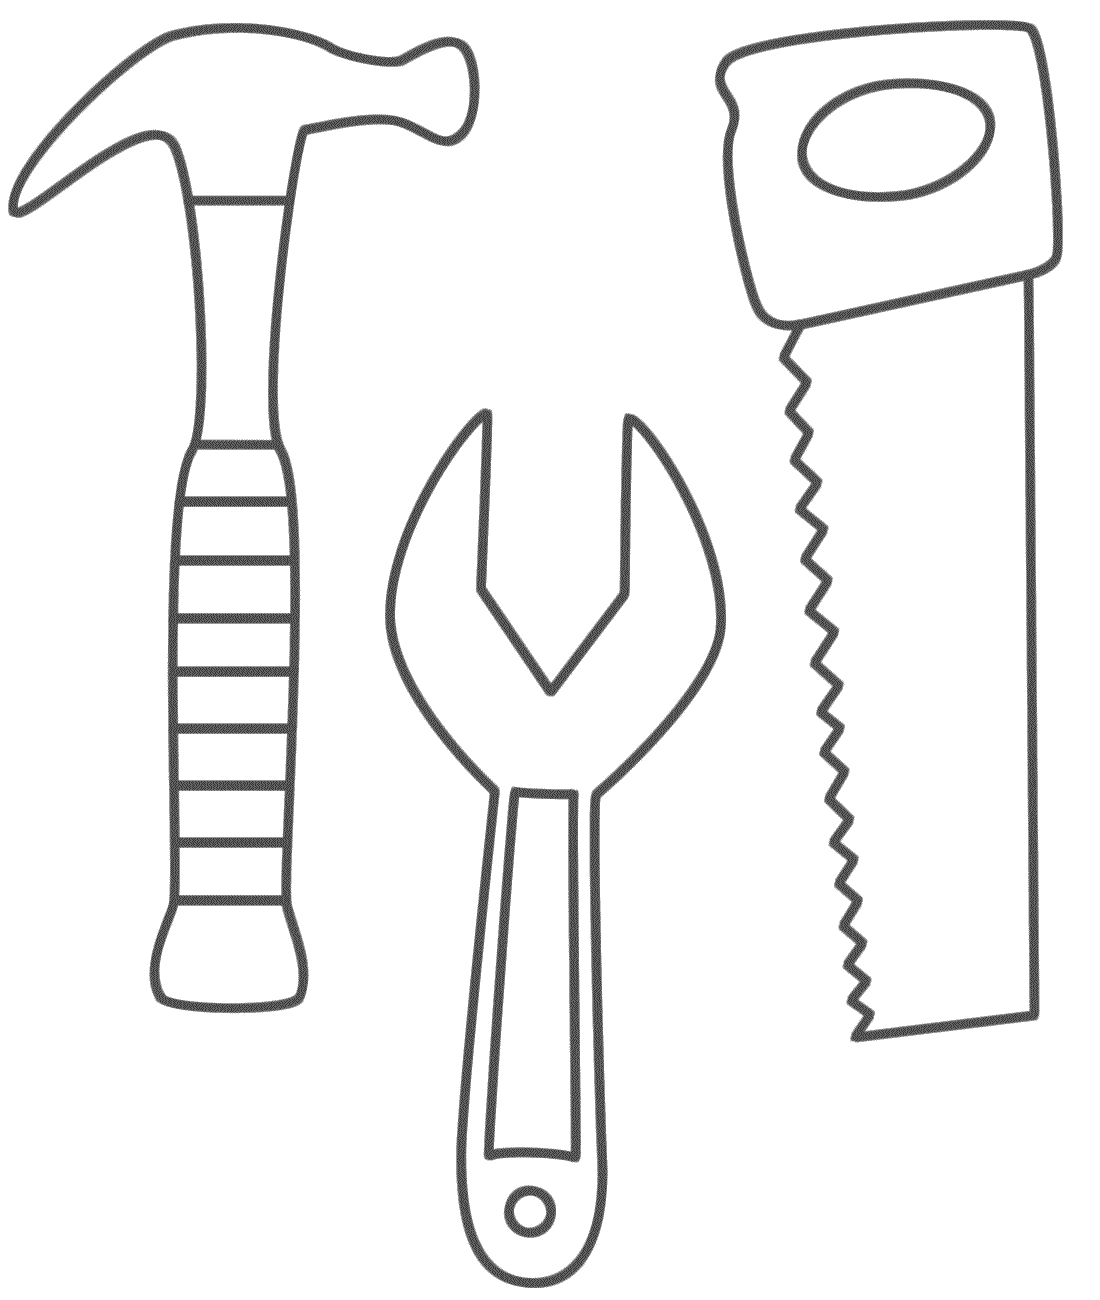 free-tool-box-coloring-page-download-free-tool-box-coloring-page-png